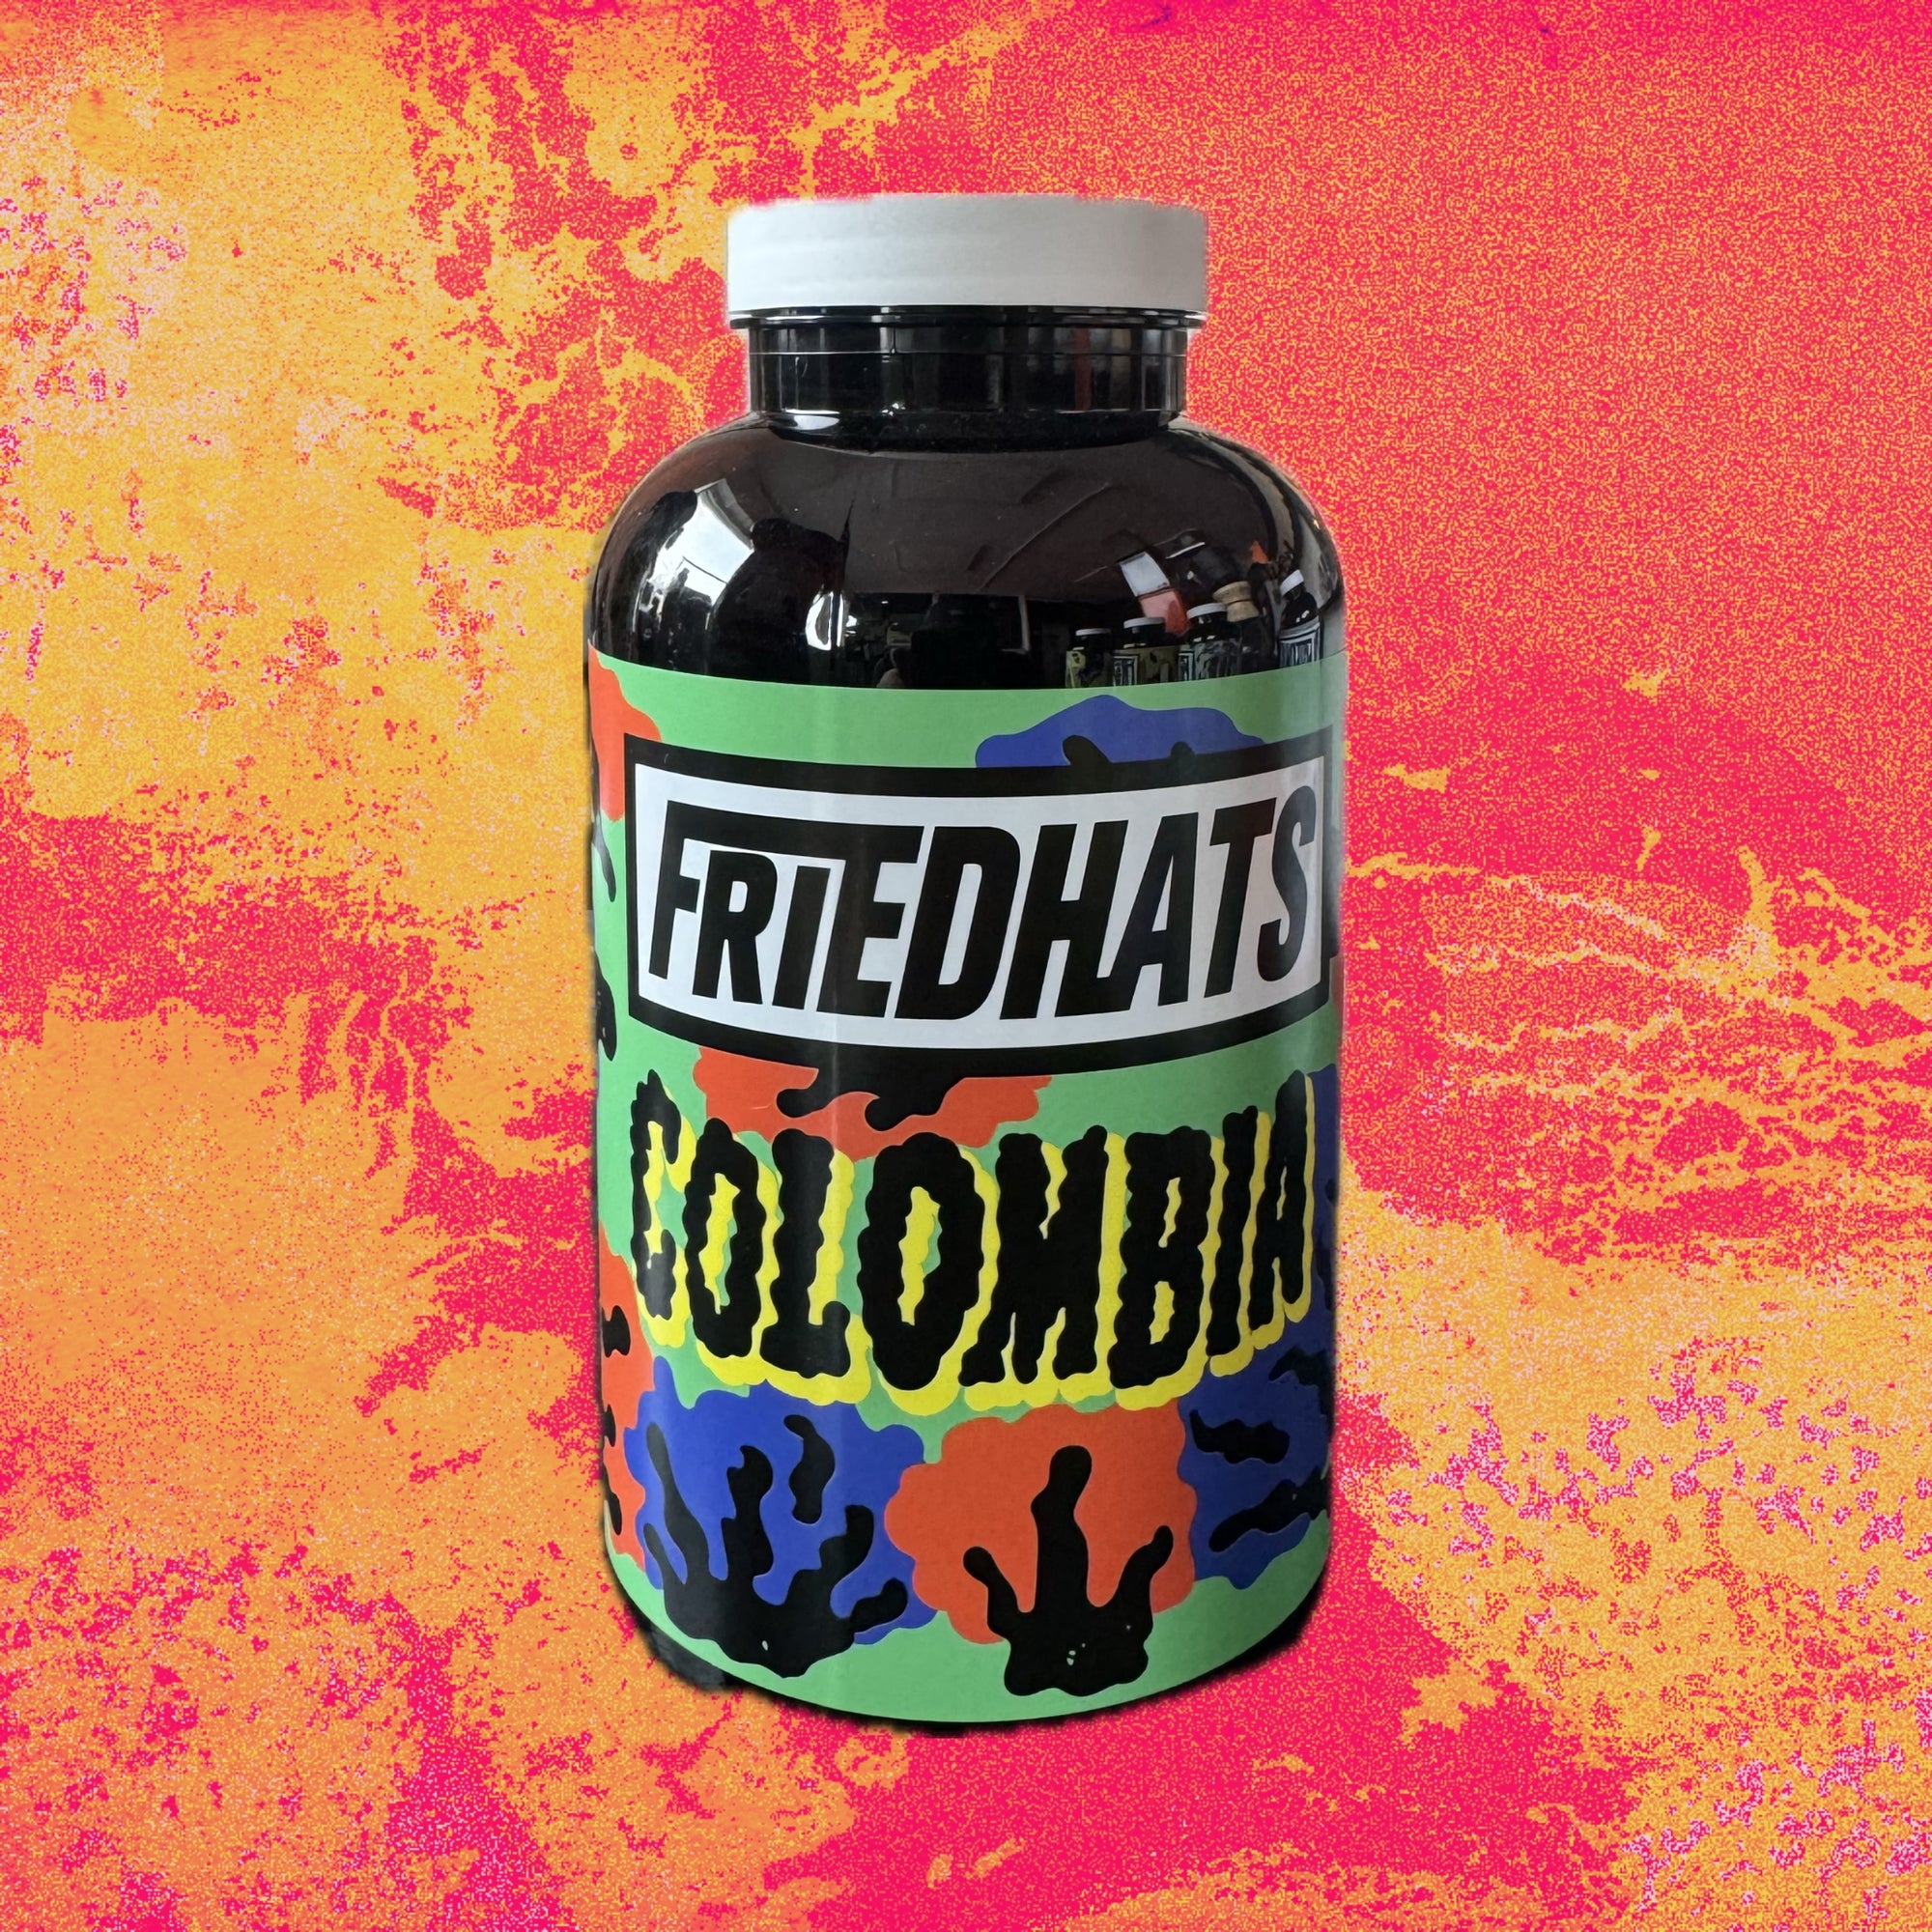 Friedhats - Colombia